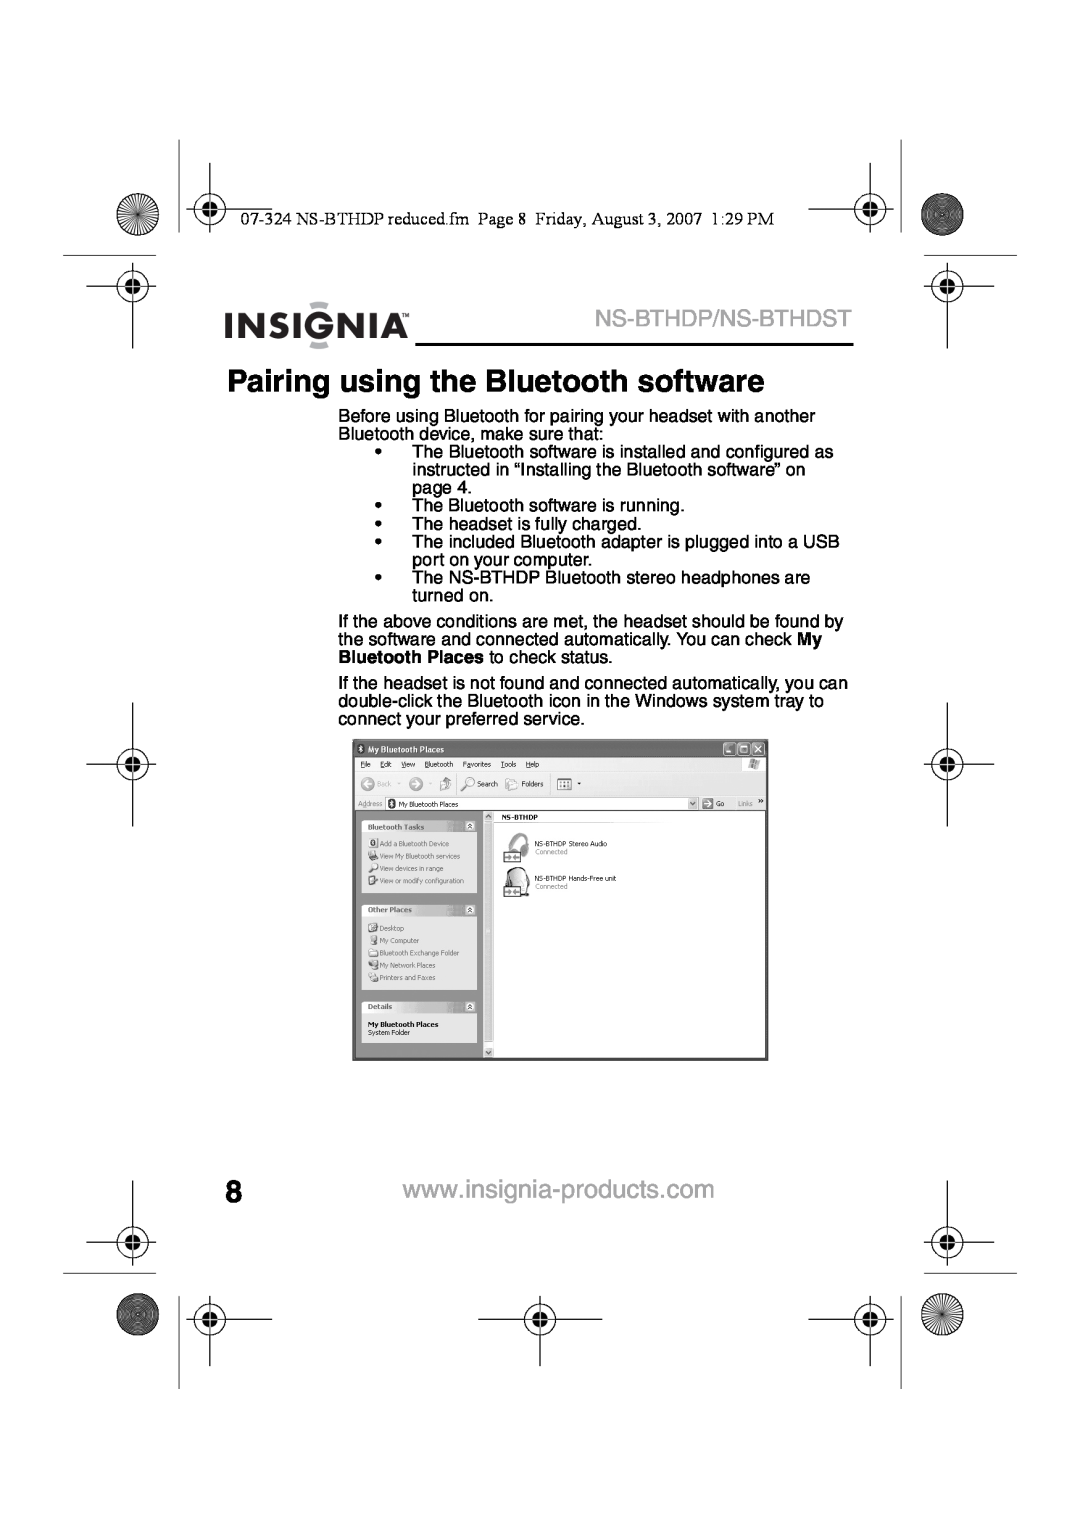 Insignia NS-BTHDST manual Pairing using the Bluetooth software, Ns-Bthdp/Ns-Bthdst 